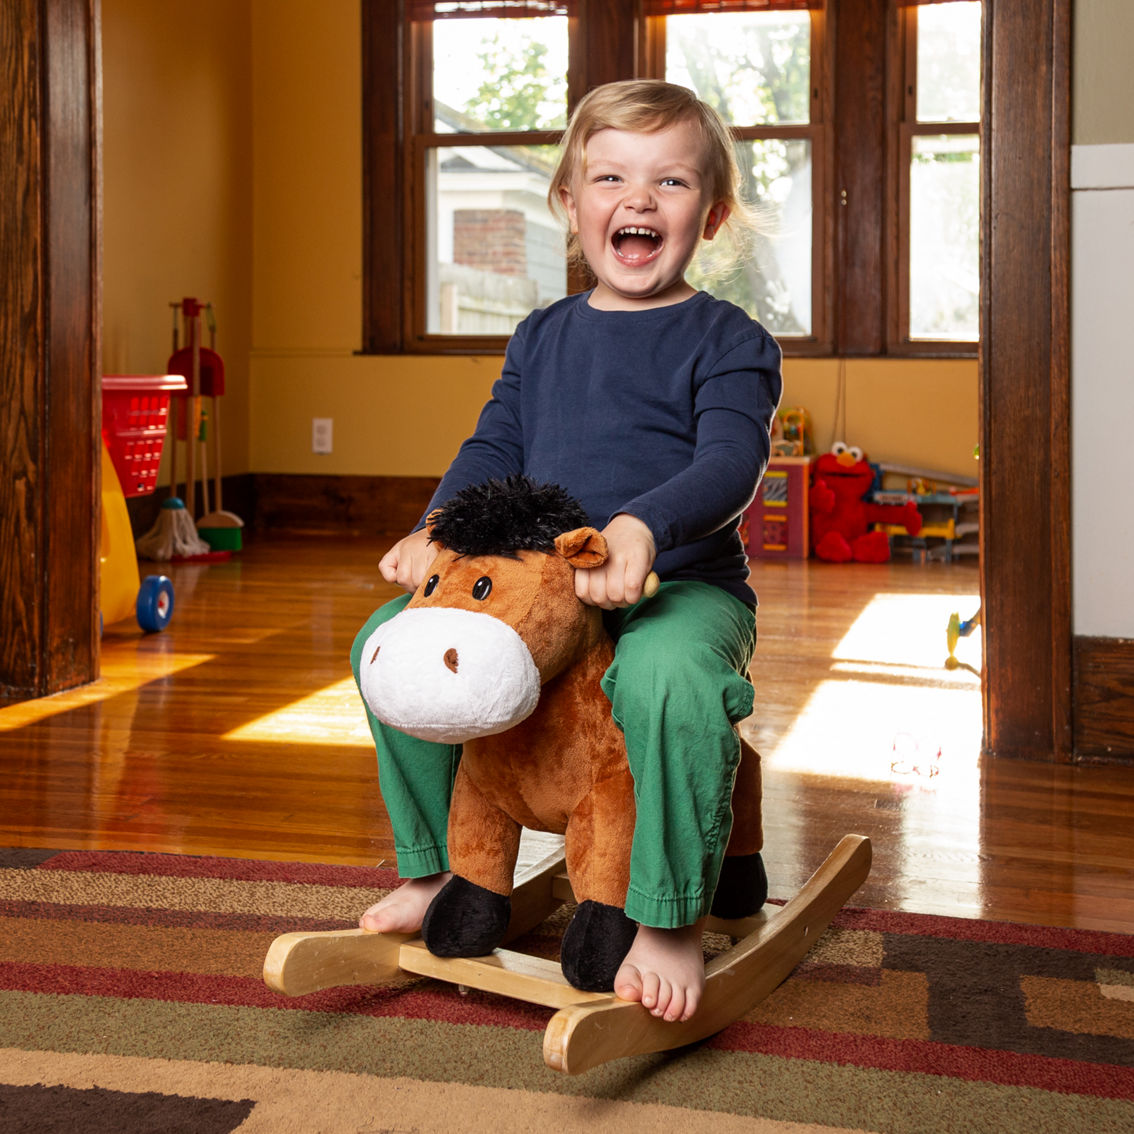 Ponyland Toys Brown Rocking Horse with Sound - Image 5 of 5